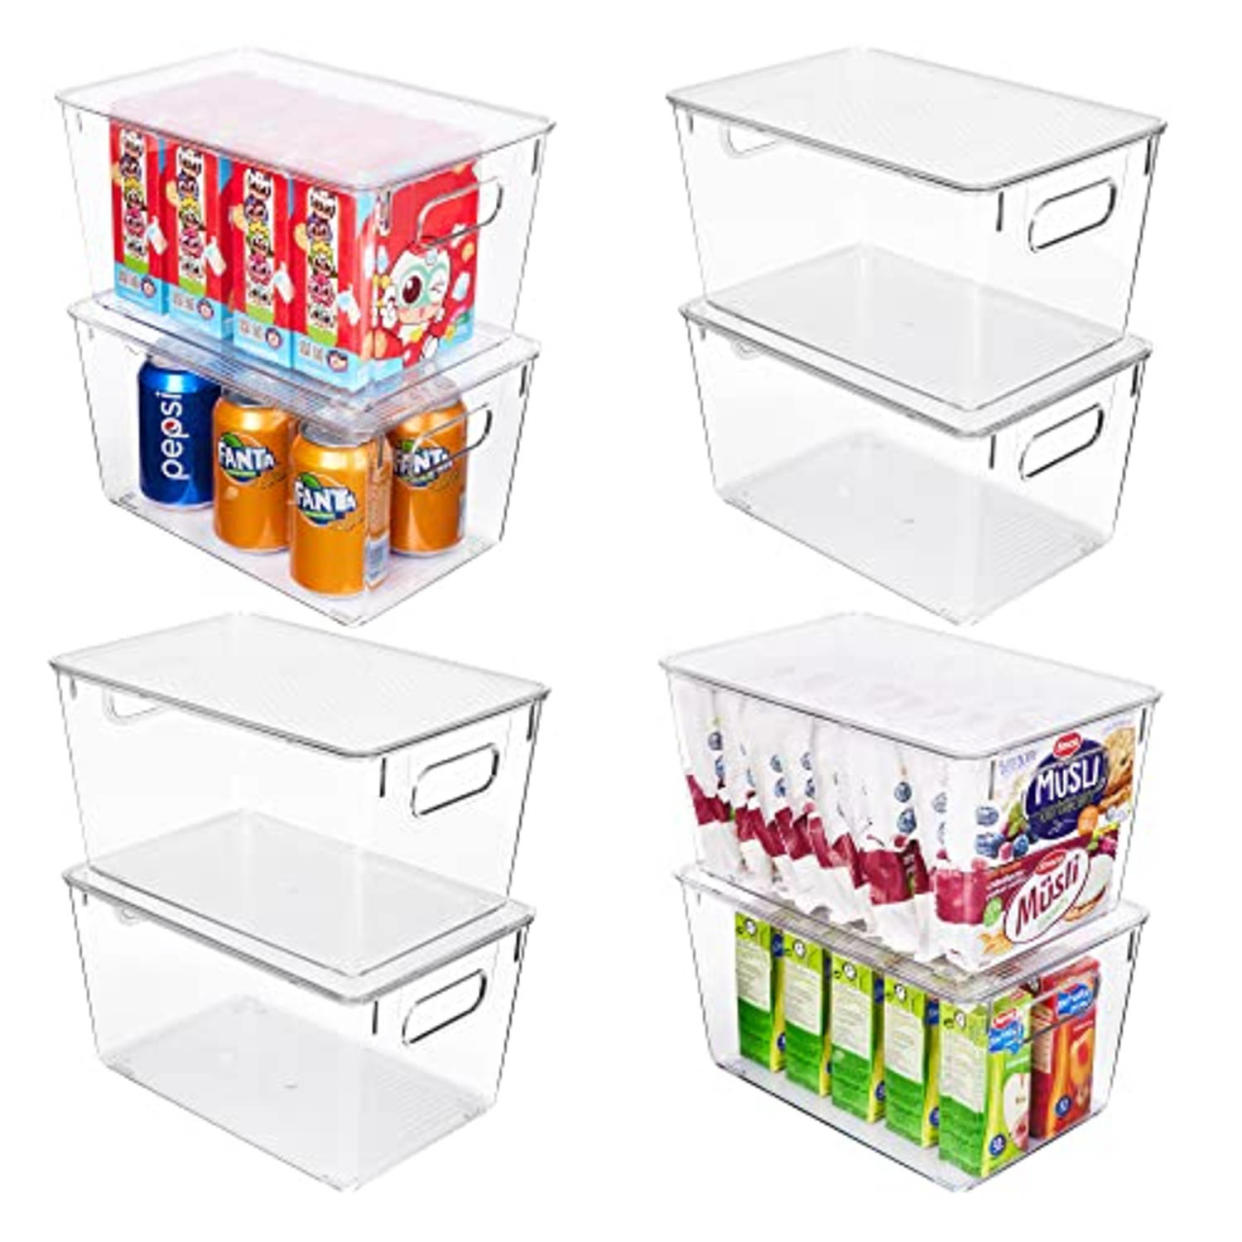 Vtopmart 8 Pack Clear Stackable Storage Bins with Lids, Large Plastic Containers with Handle for Pantry Organization and Storage,Perfect for Kitchen, Fridge, Cabinet, Bathroom Organizer (AMAZON)